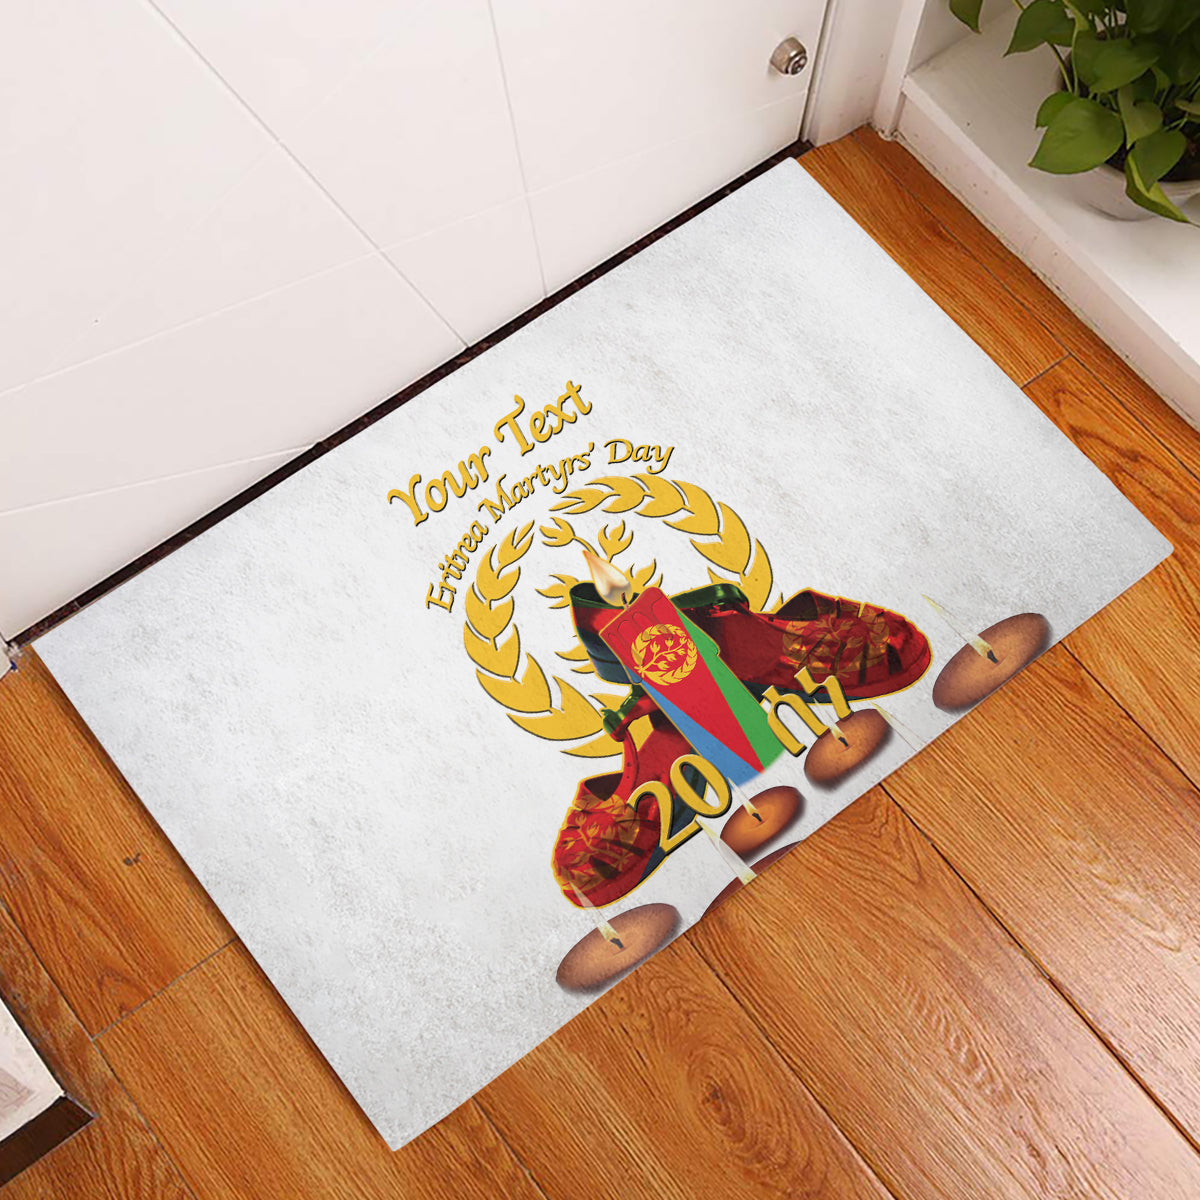 Custom Eritrea Martyrs' Day Rubber Doormat 20 June Shida Shoes With Candles - White